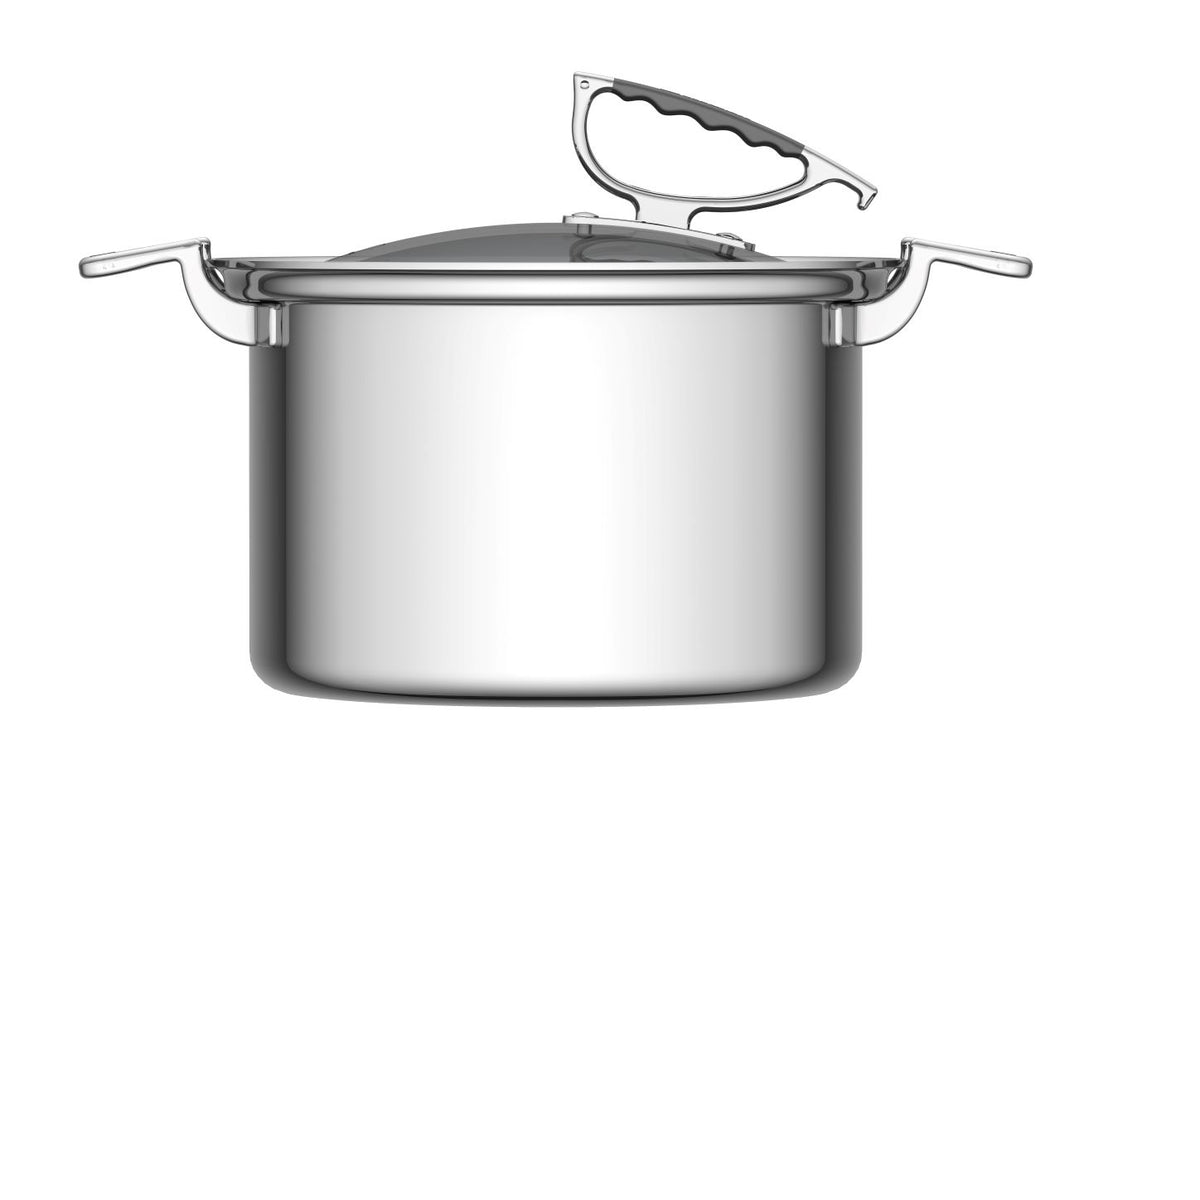 CookCraft 8 Saute Pan with Glass Latch Lid